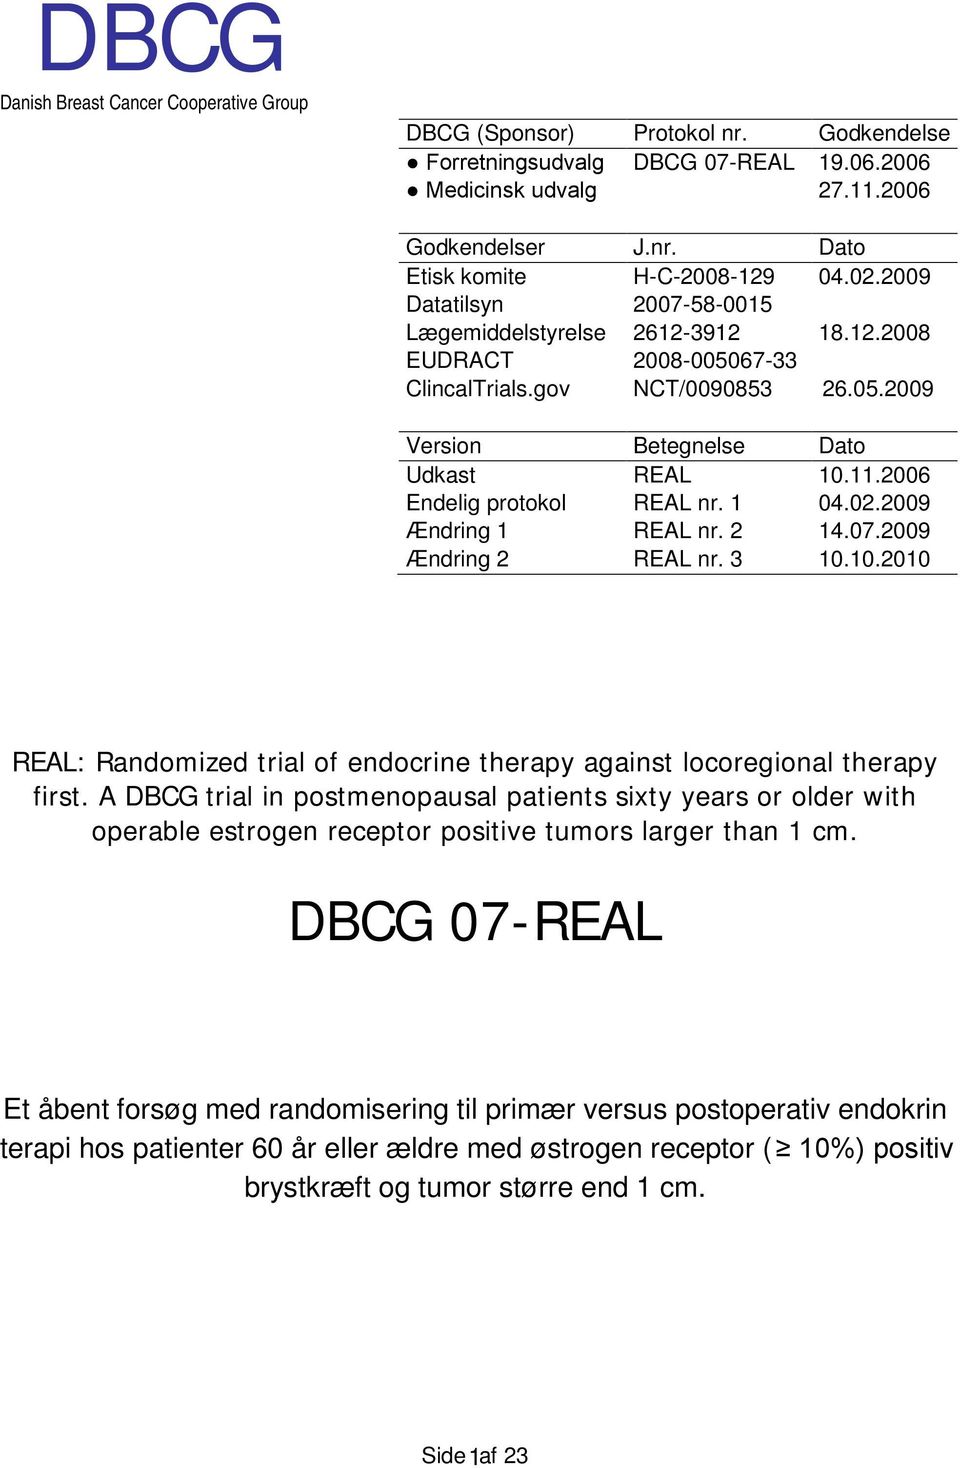 2006 Endelig protokol REAL nr. 1 04.02.2009 Ændring 1 REAL nr. 2 14.07.2009 Ændring 2 REAL nr. 3 10.10.2010 REAL: Randomized trial of endocrine therapy against locoregional therapy first.